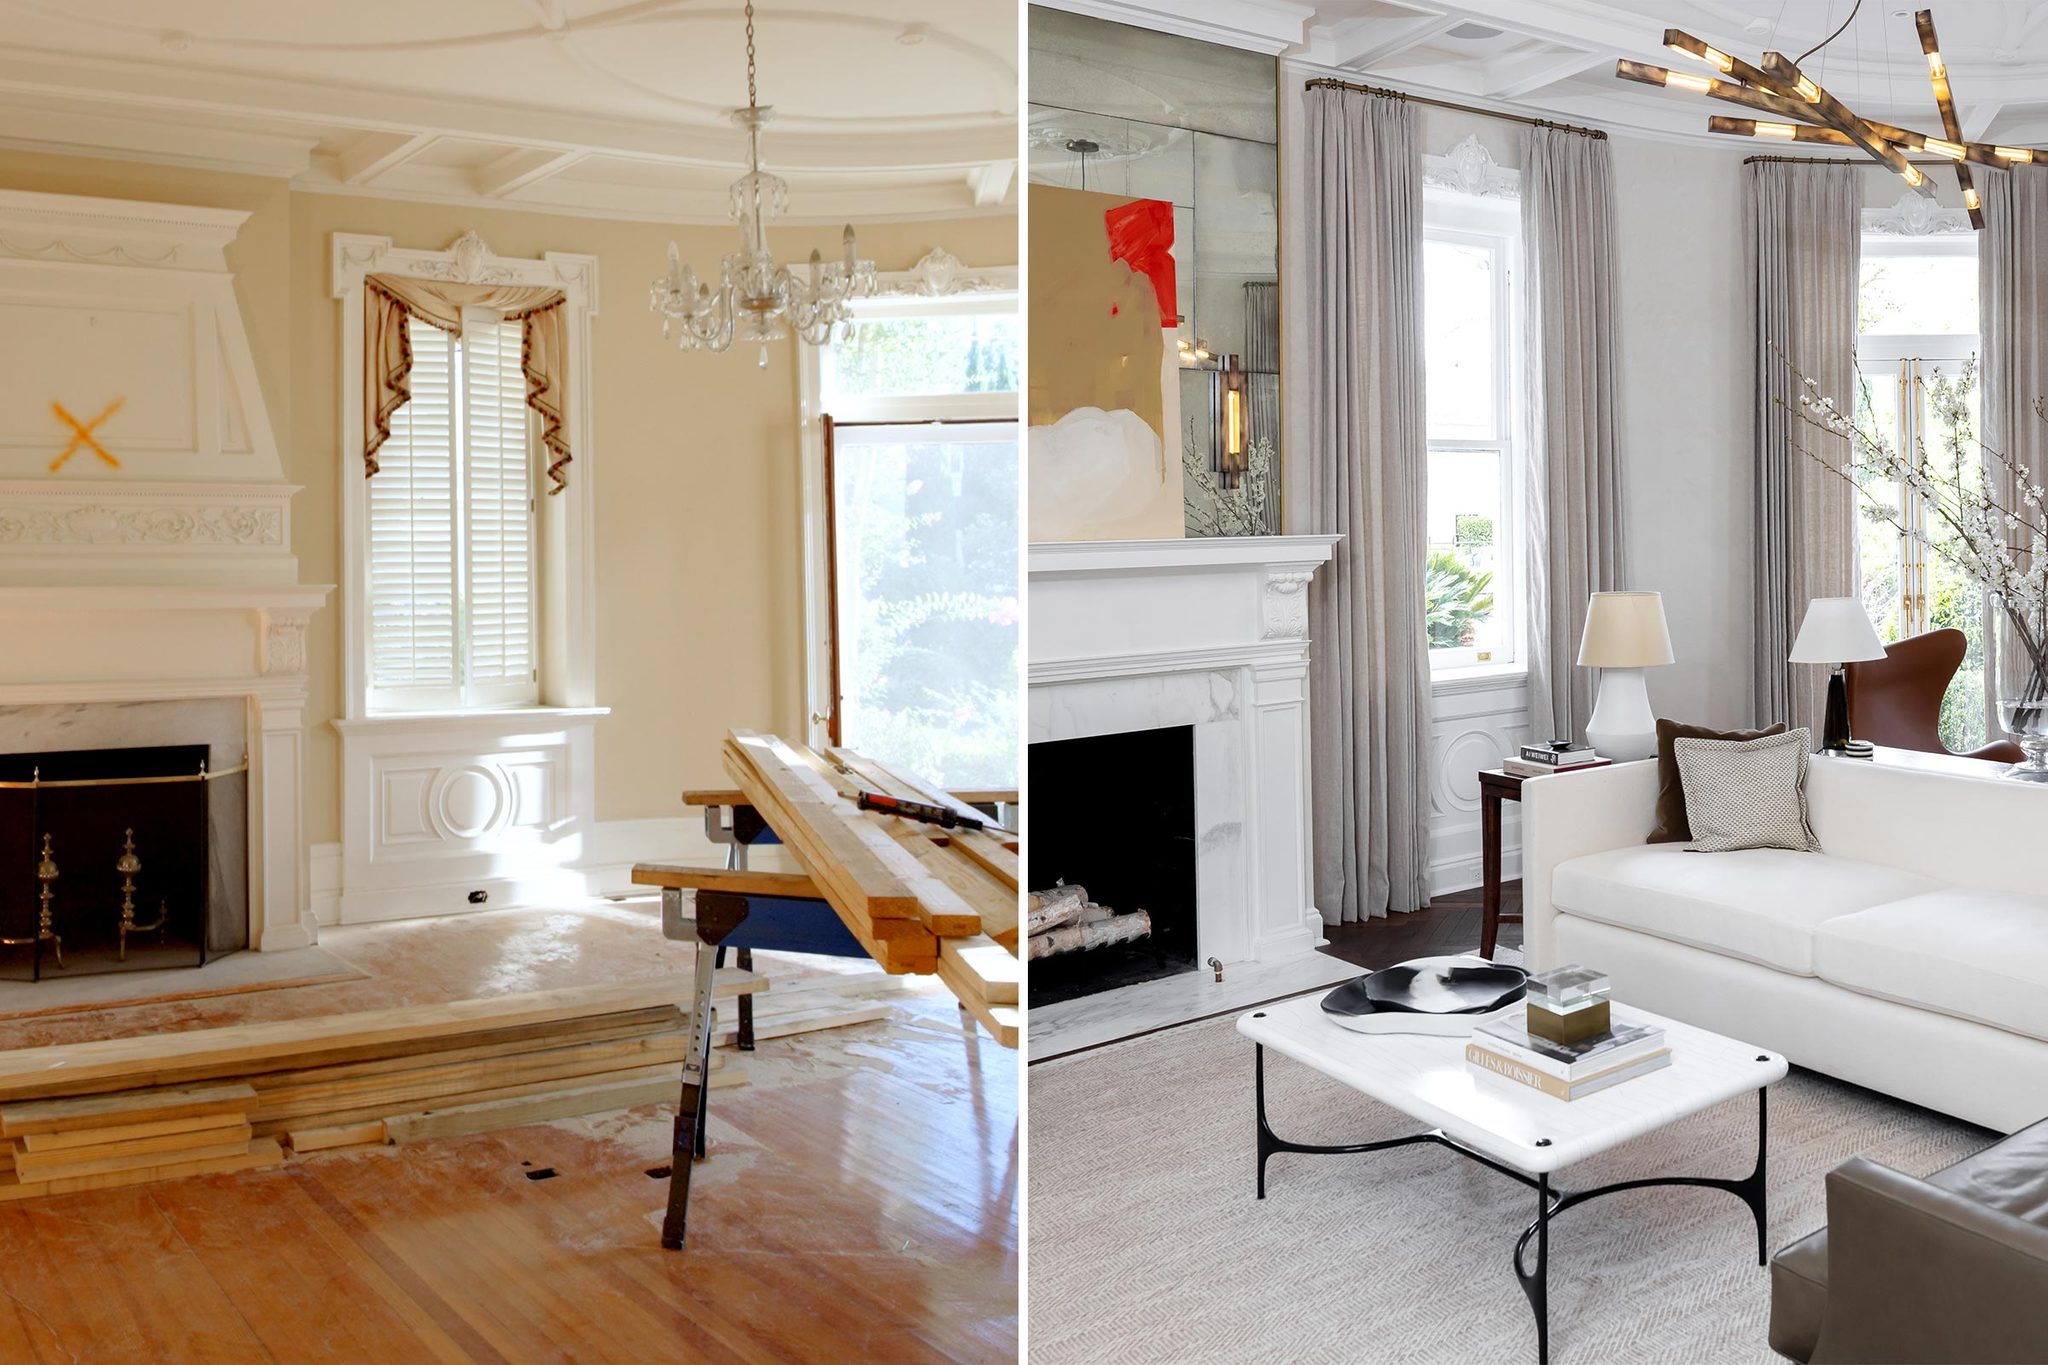 Before and After: Musician Darius Rucker's Historic Home Restoration